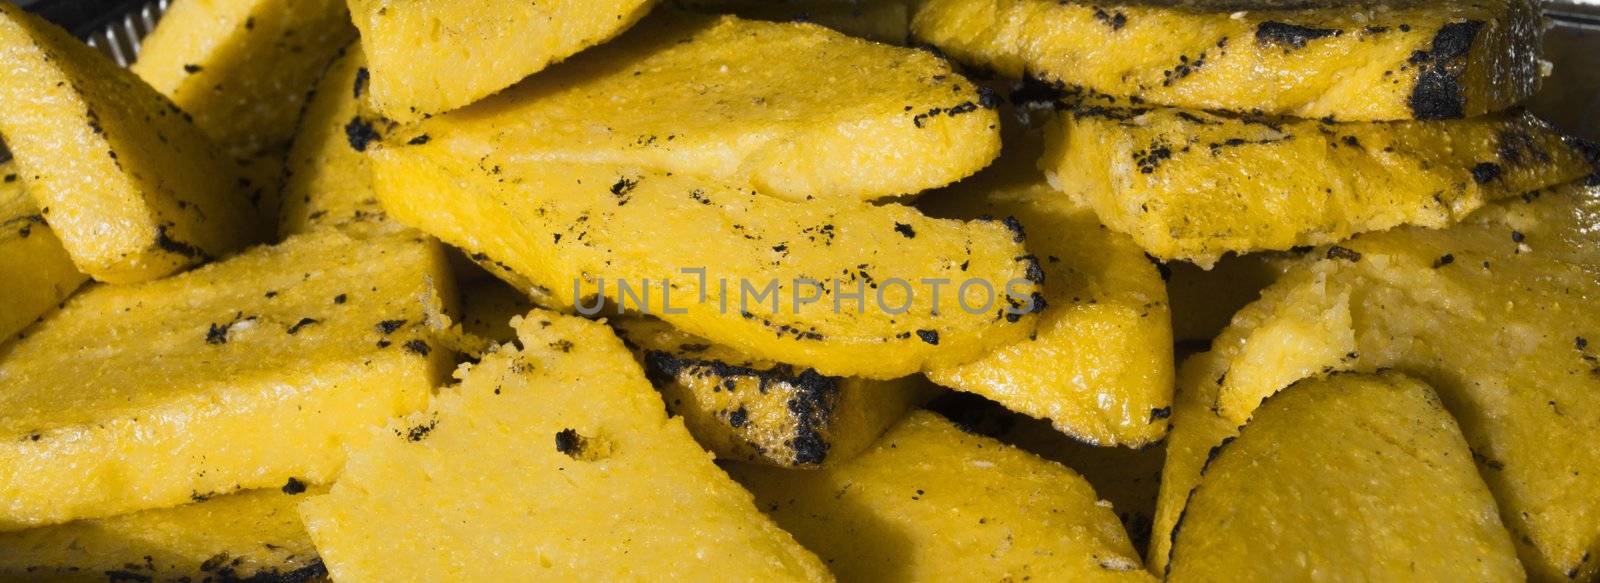 Polenta italian traditional dishes cooked in barbecue grilled style